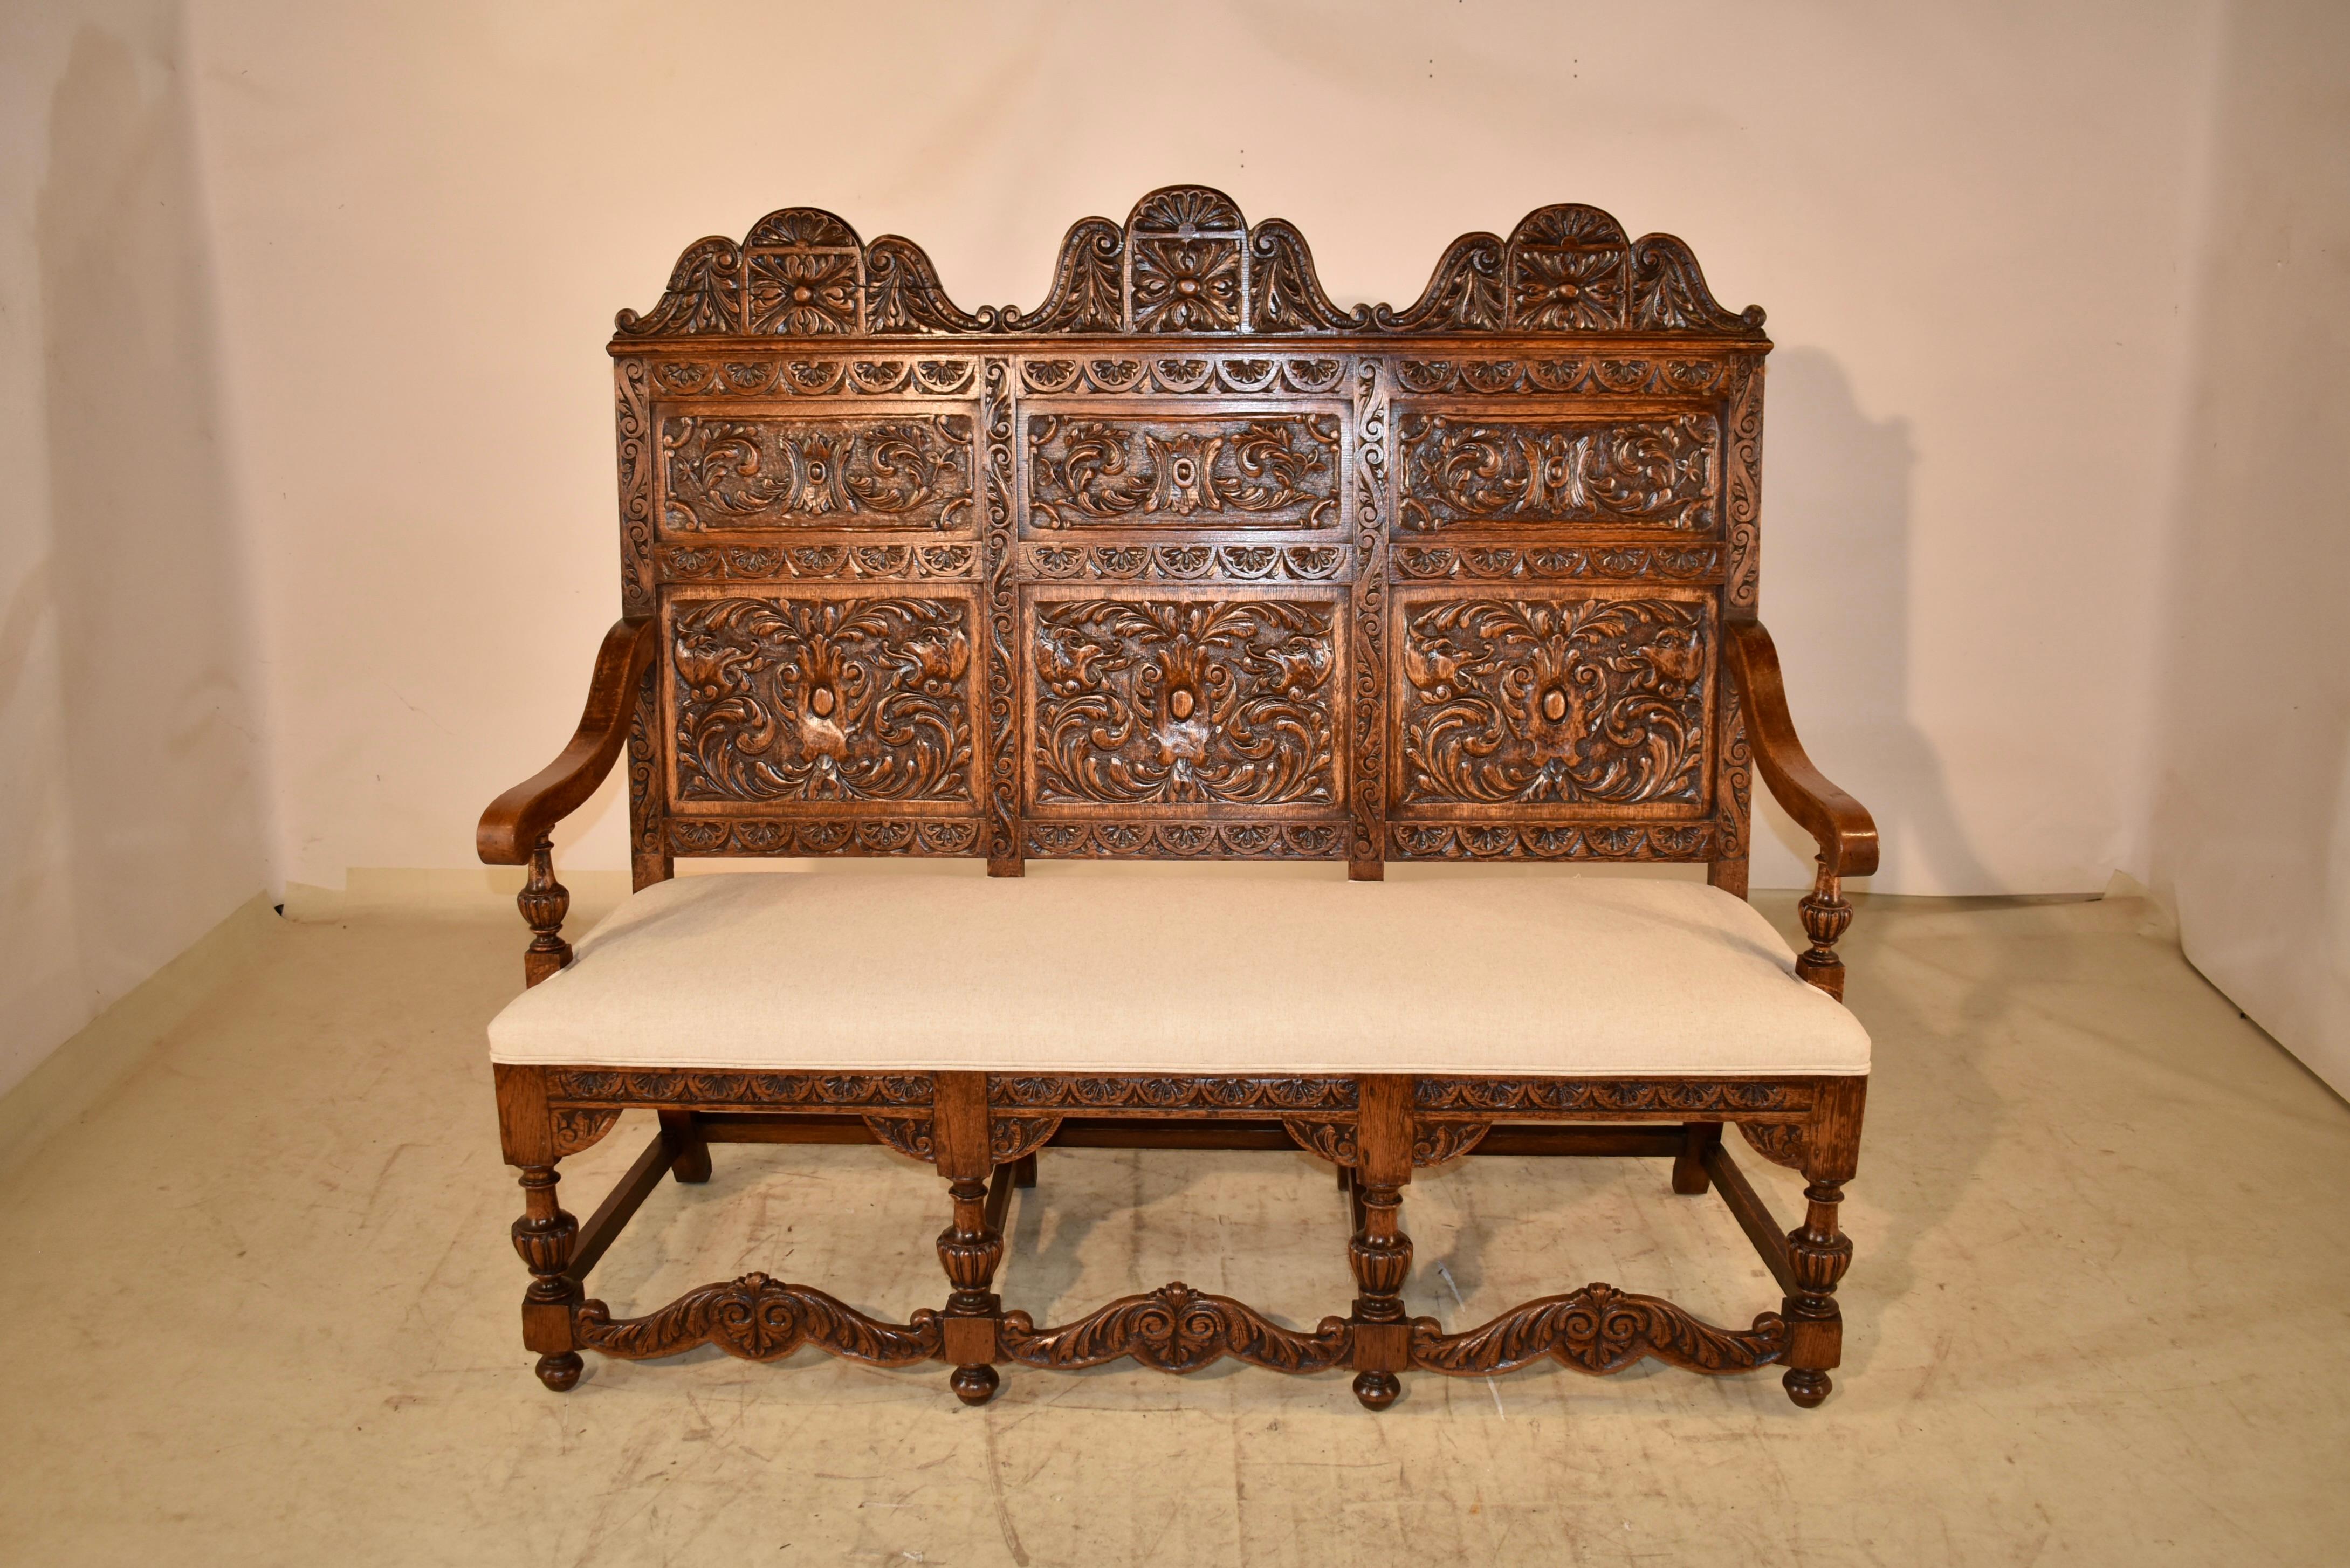 19th century oak bench from France with the most glorious hand carved decoration we have had the privilege to offer.  The back of the bench is wonderfully tall, and has three panels, all with exquisite hand carved decoration, separated by hand